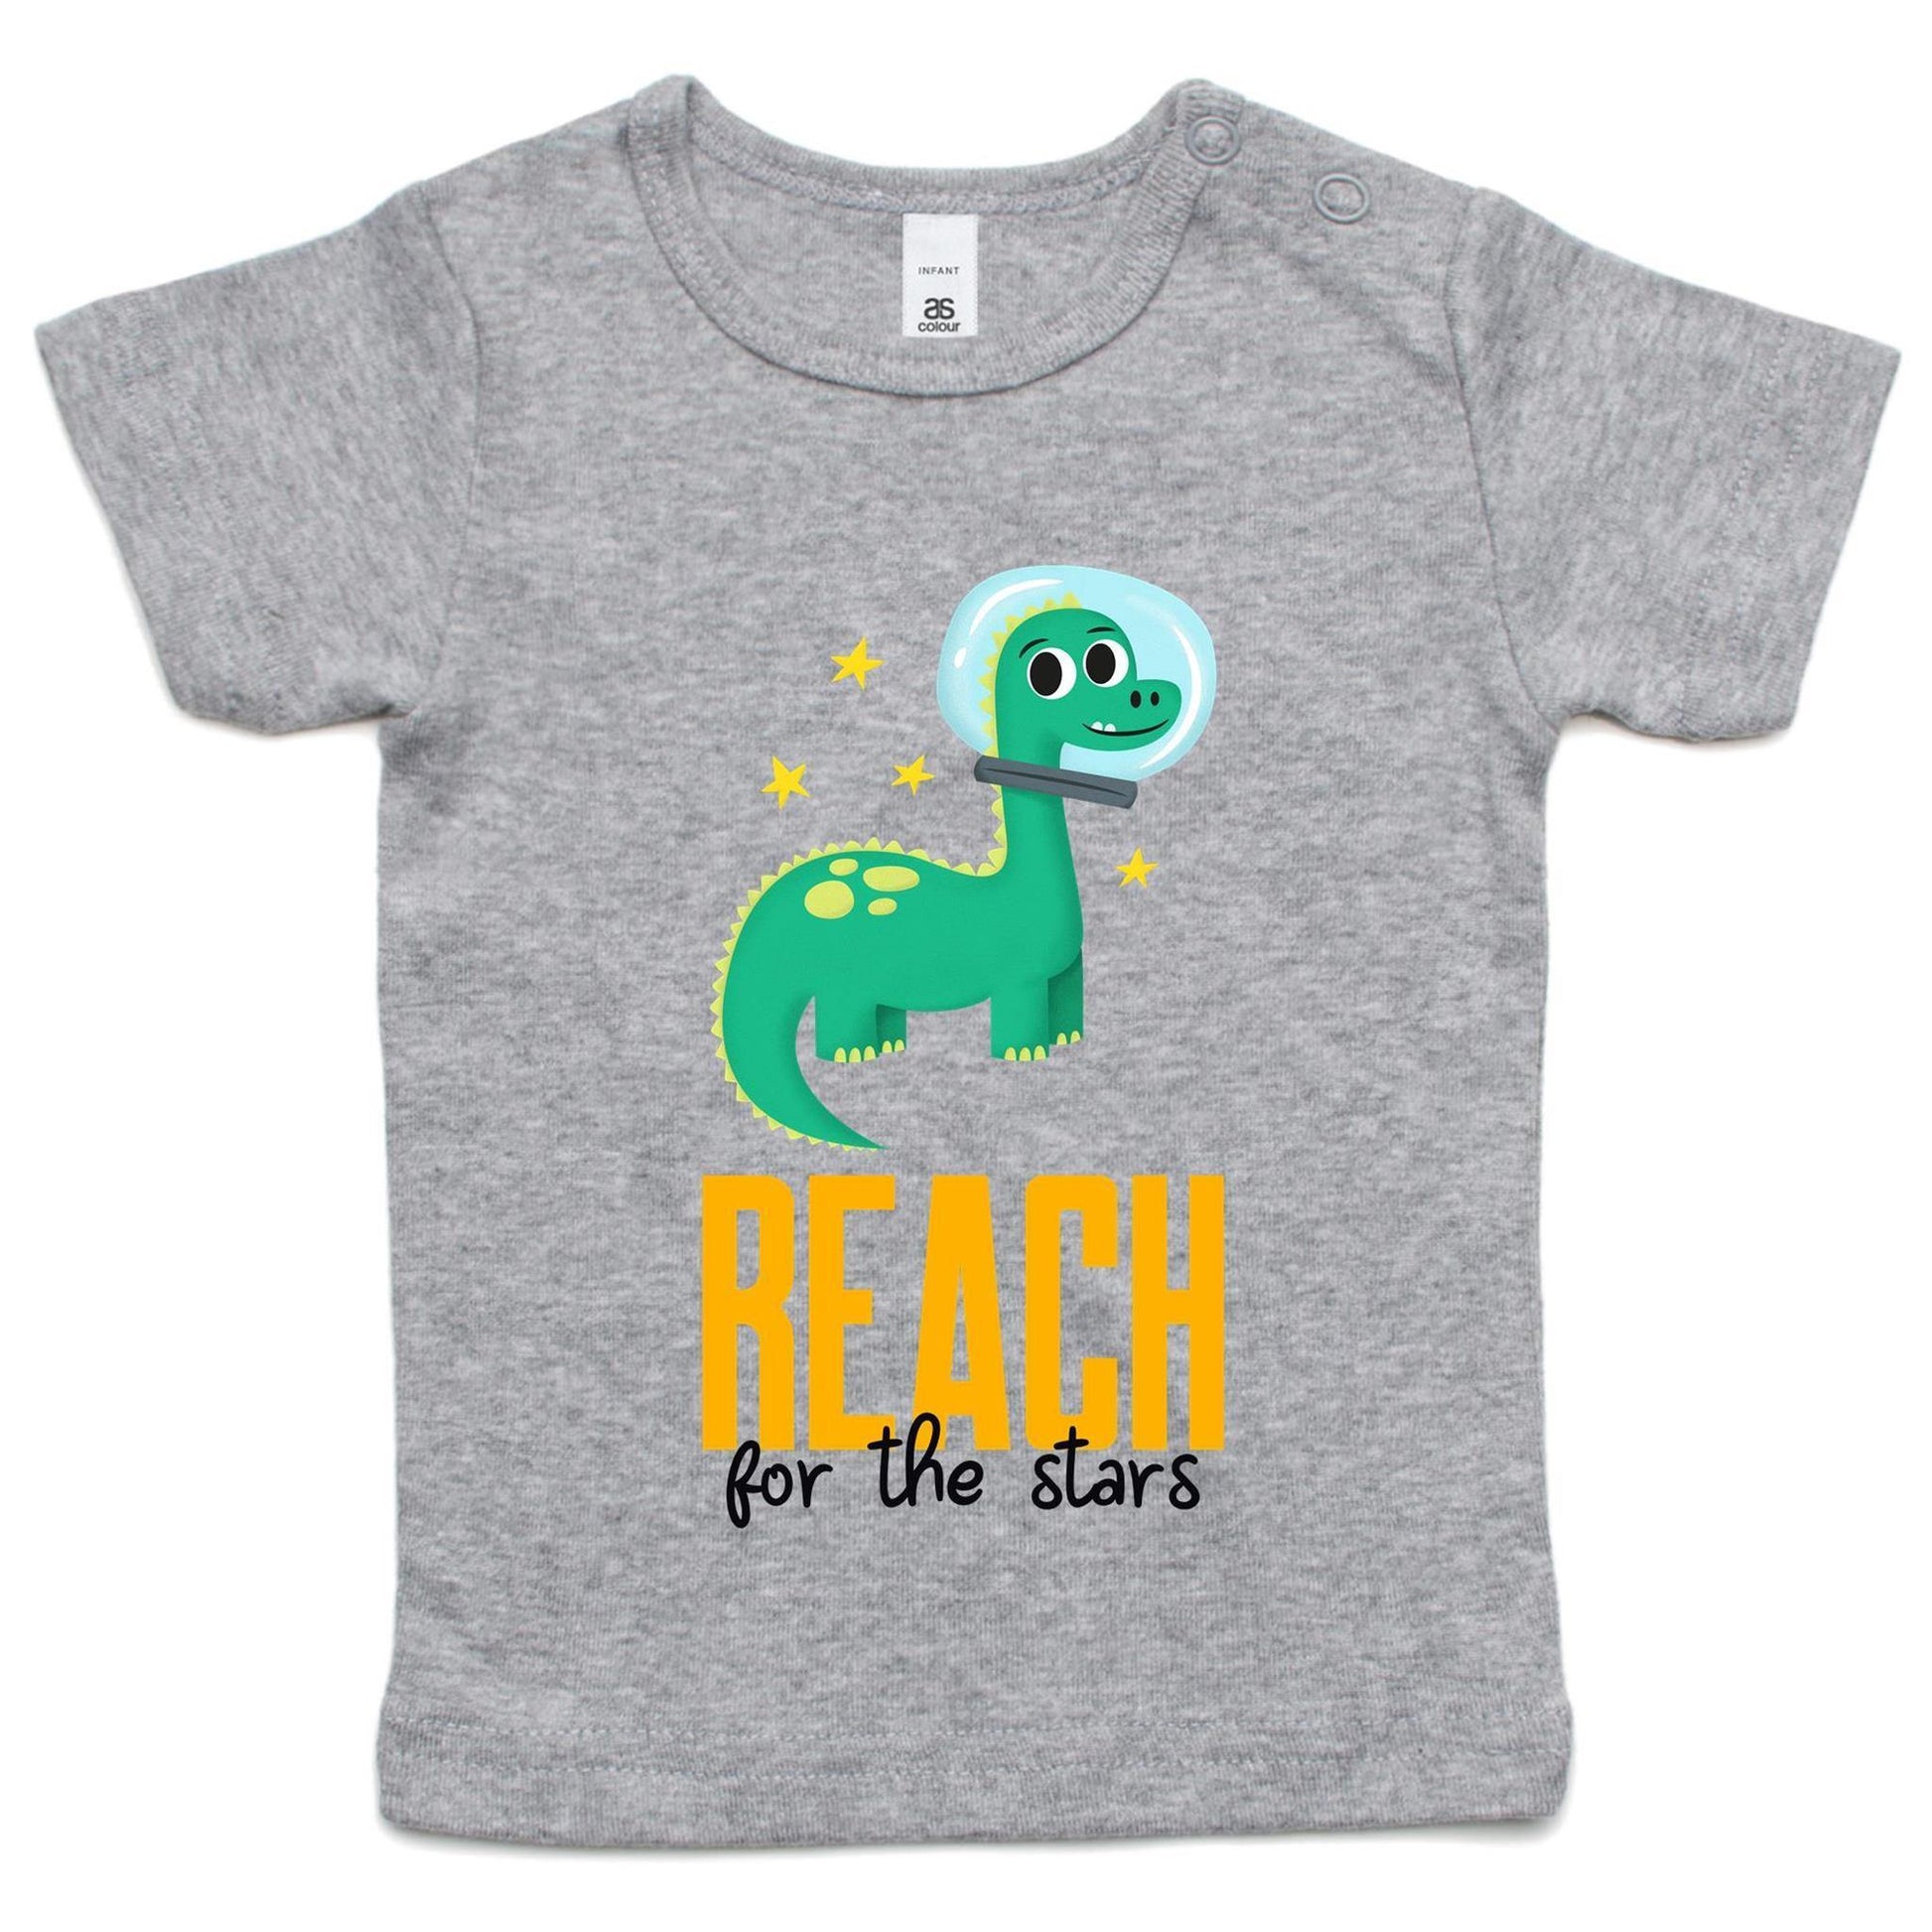 Reach For The Stars - Baby T-shirt Grey Marle Baby T-shirt animal kids Space